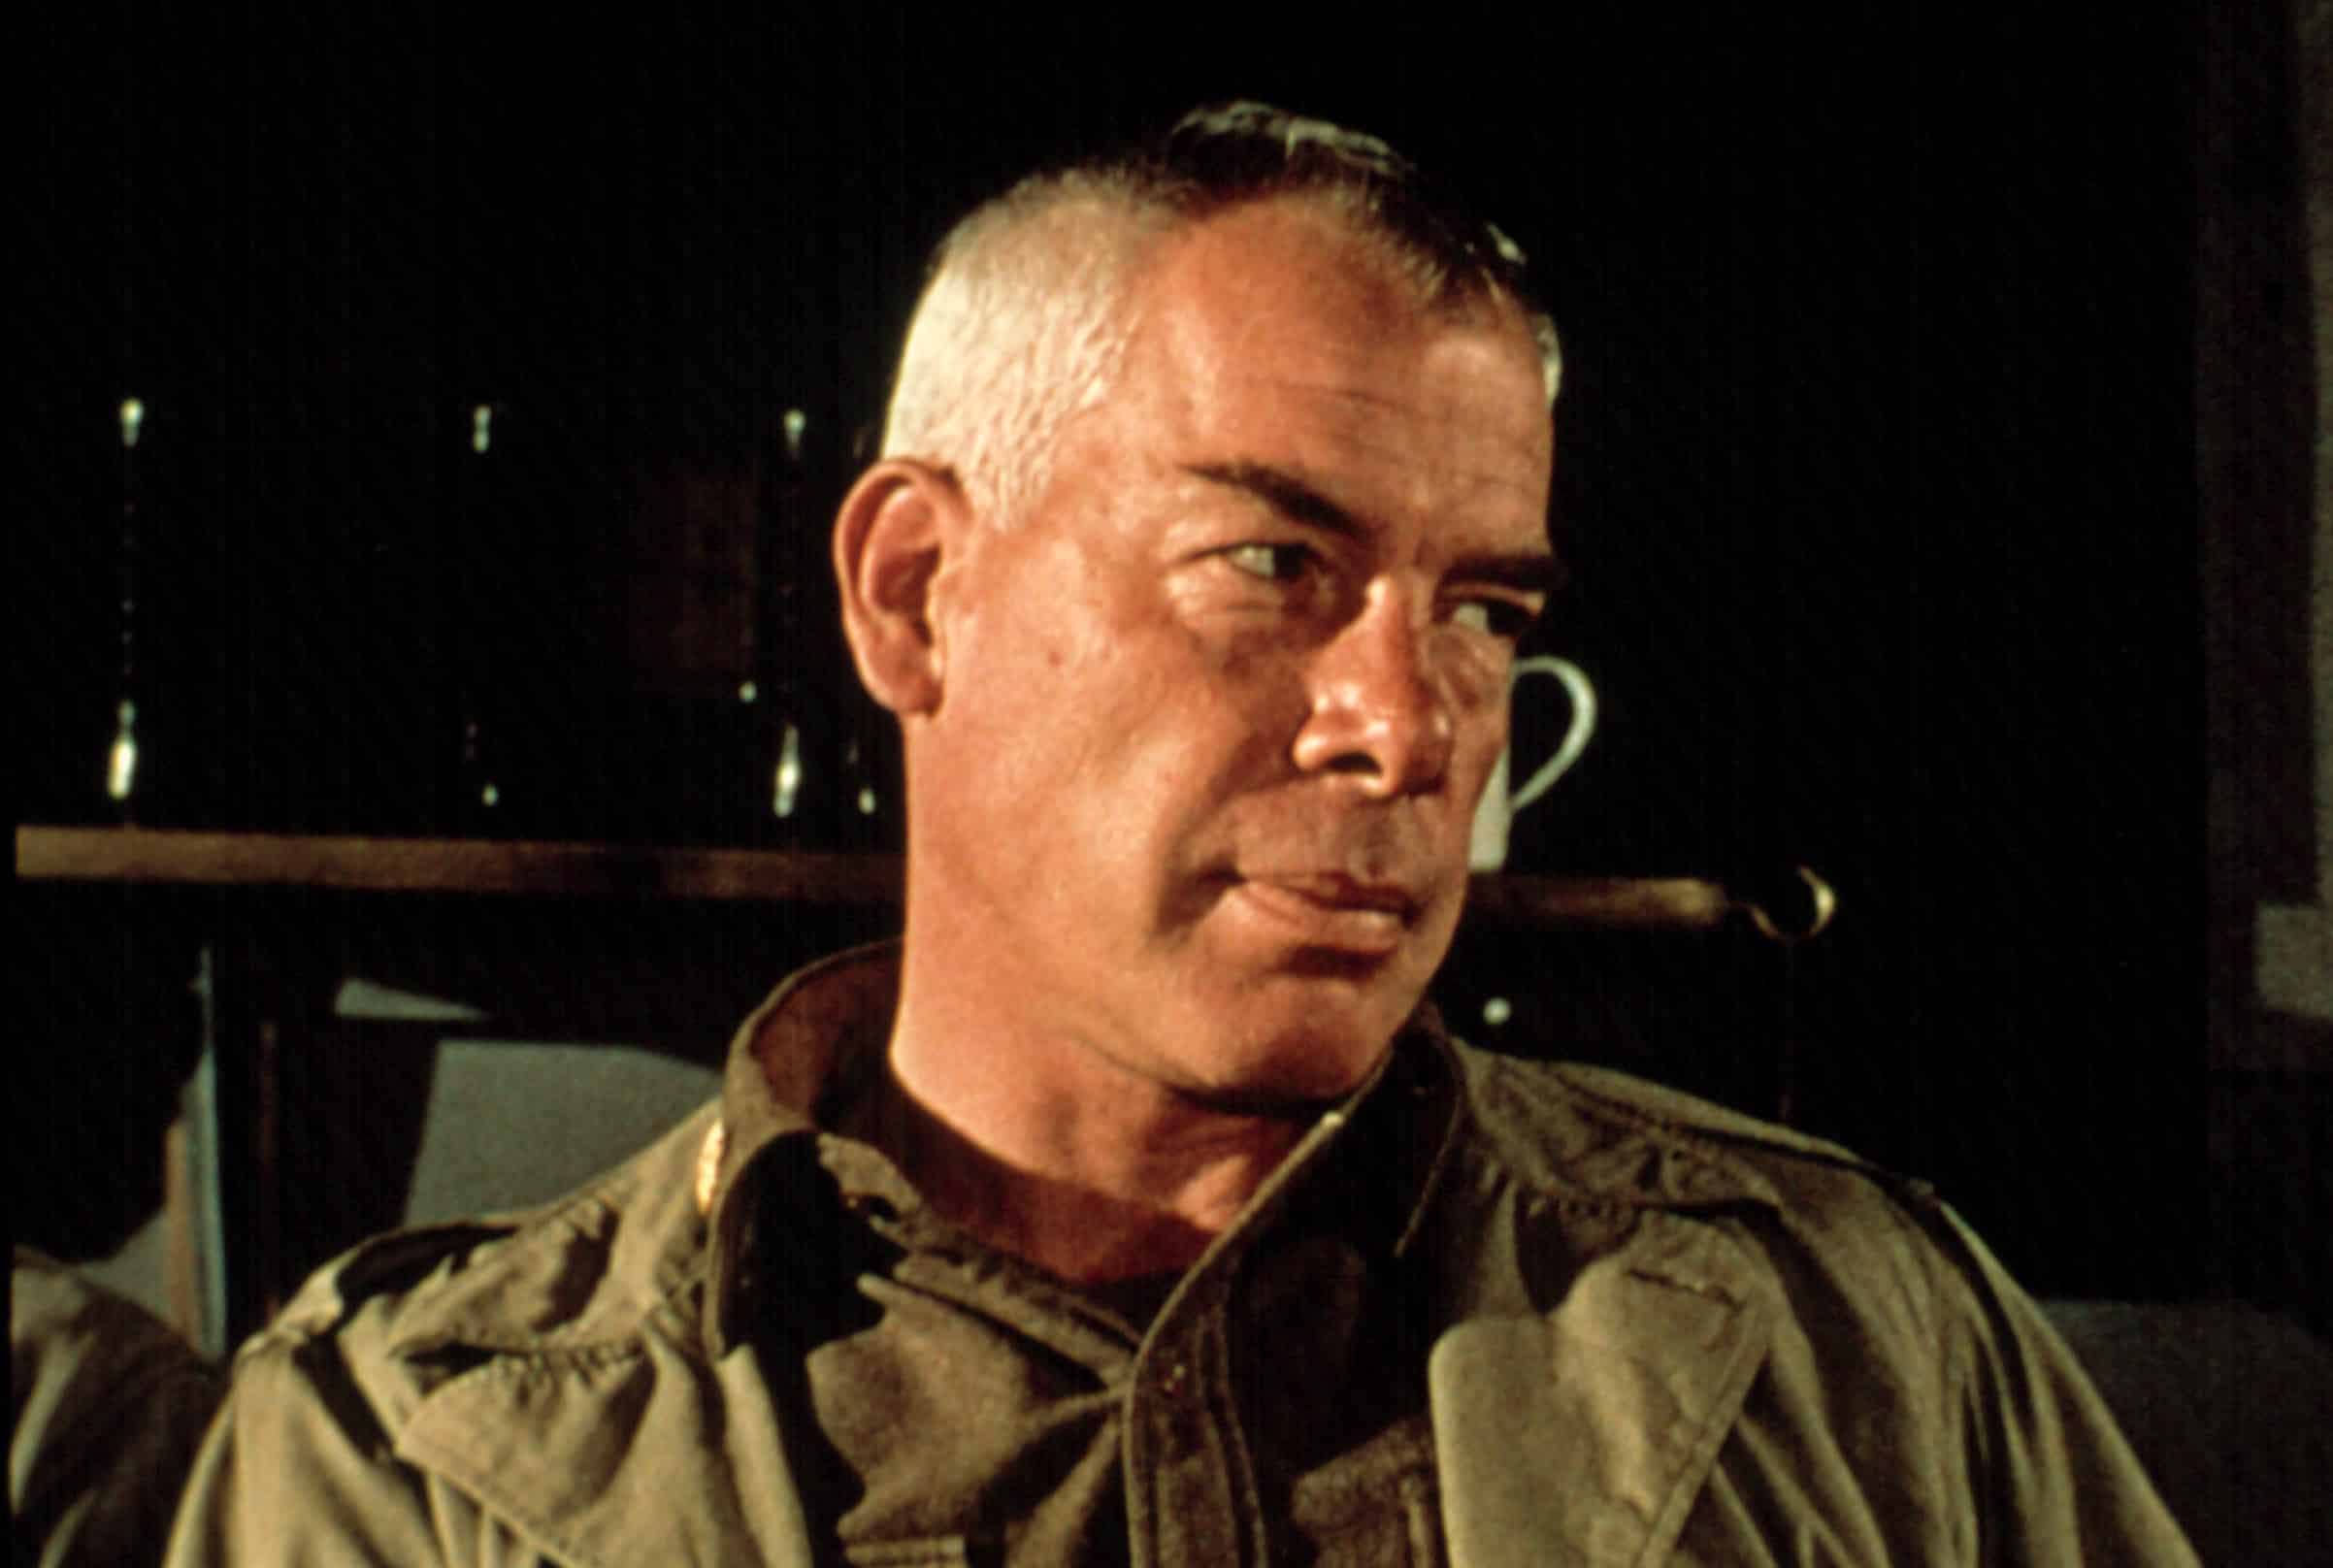 THE DIRTY DOZEN, Lee Marvin, 1967